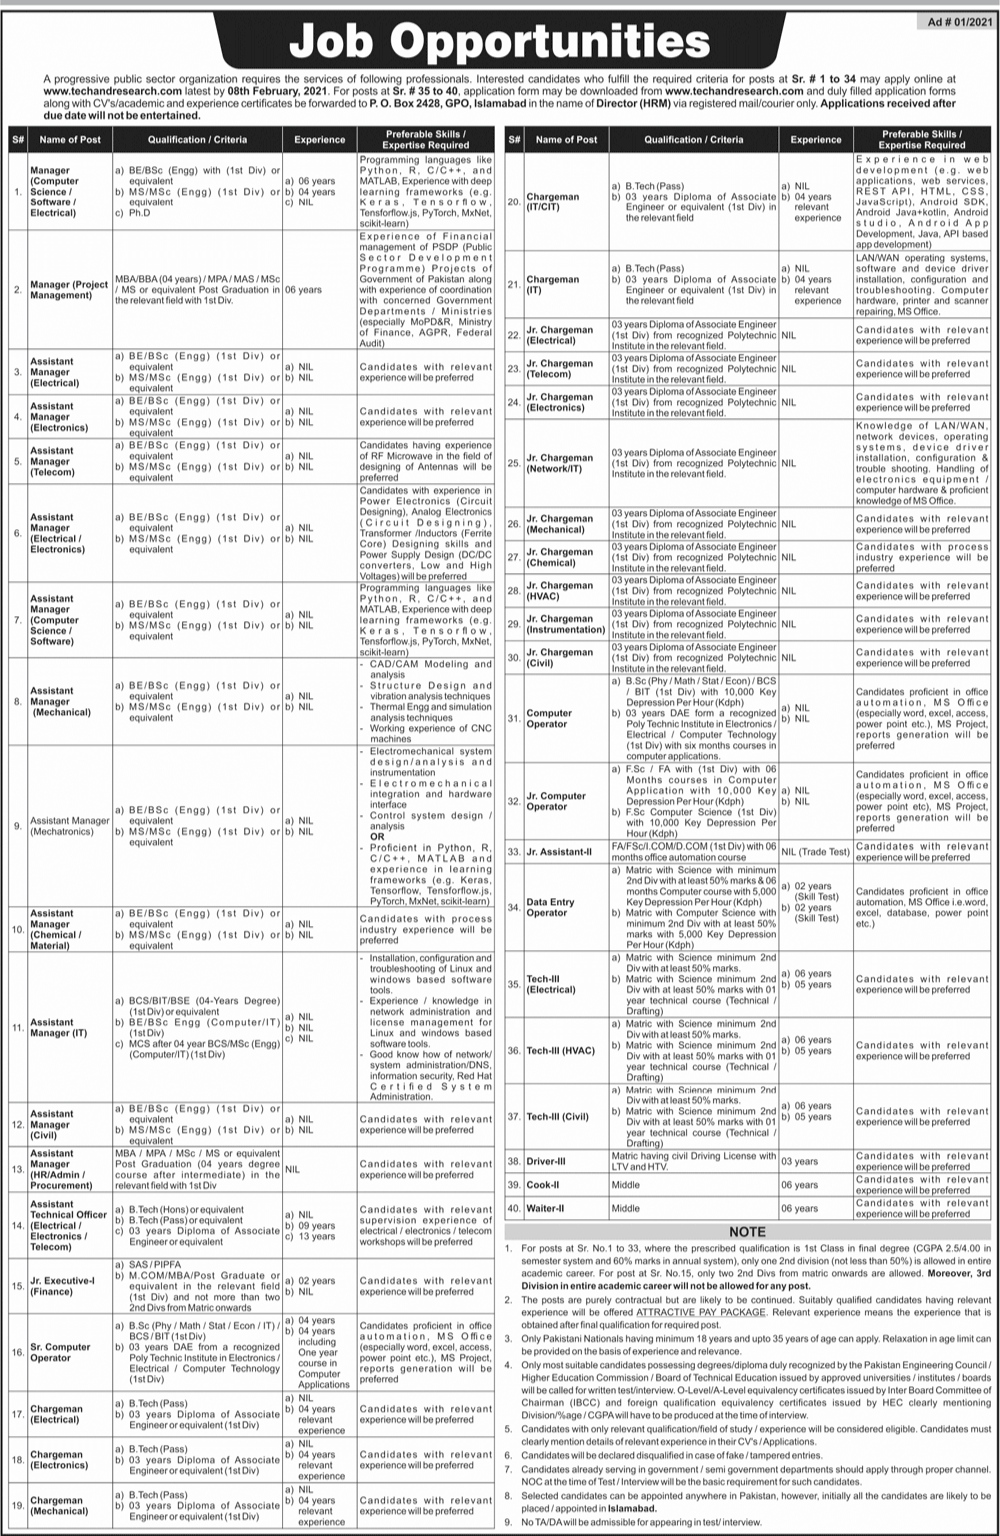 Public Sector Organization Jobs 2021 For Computer Operator, Junior Assistant, Data Entry Operator, Engineering Posts and more